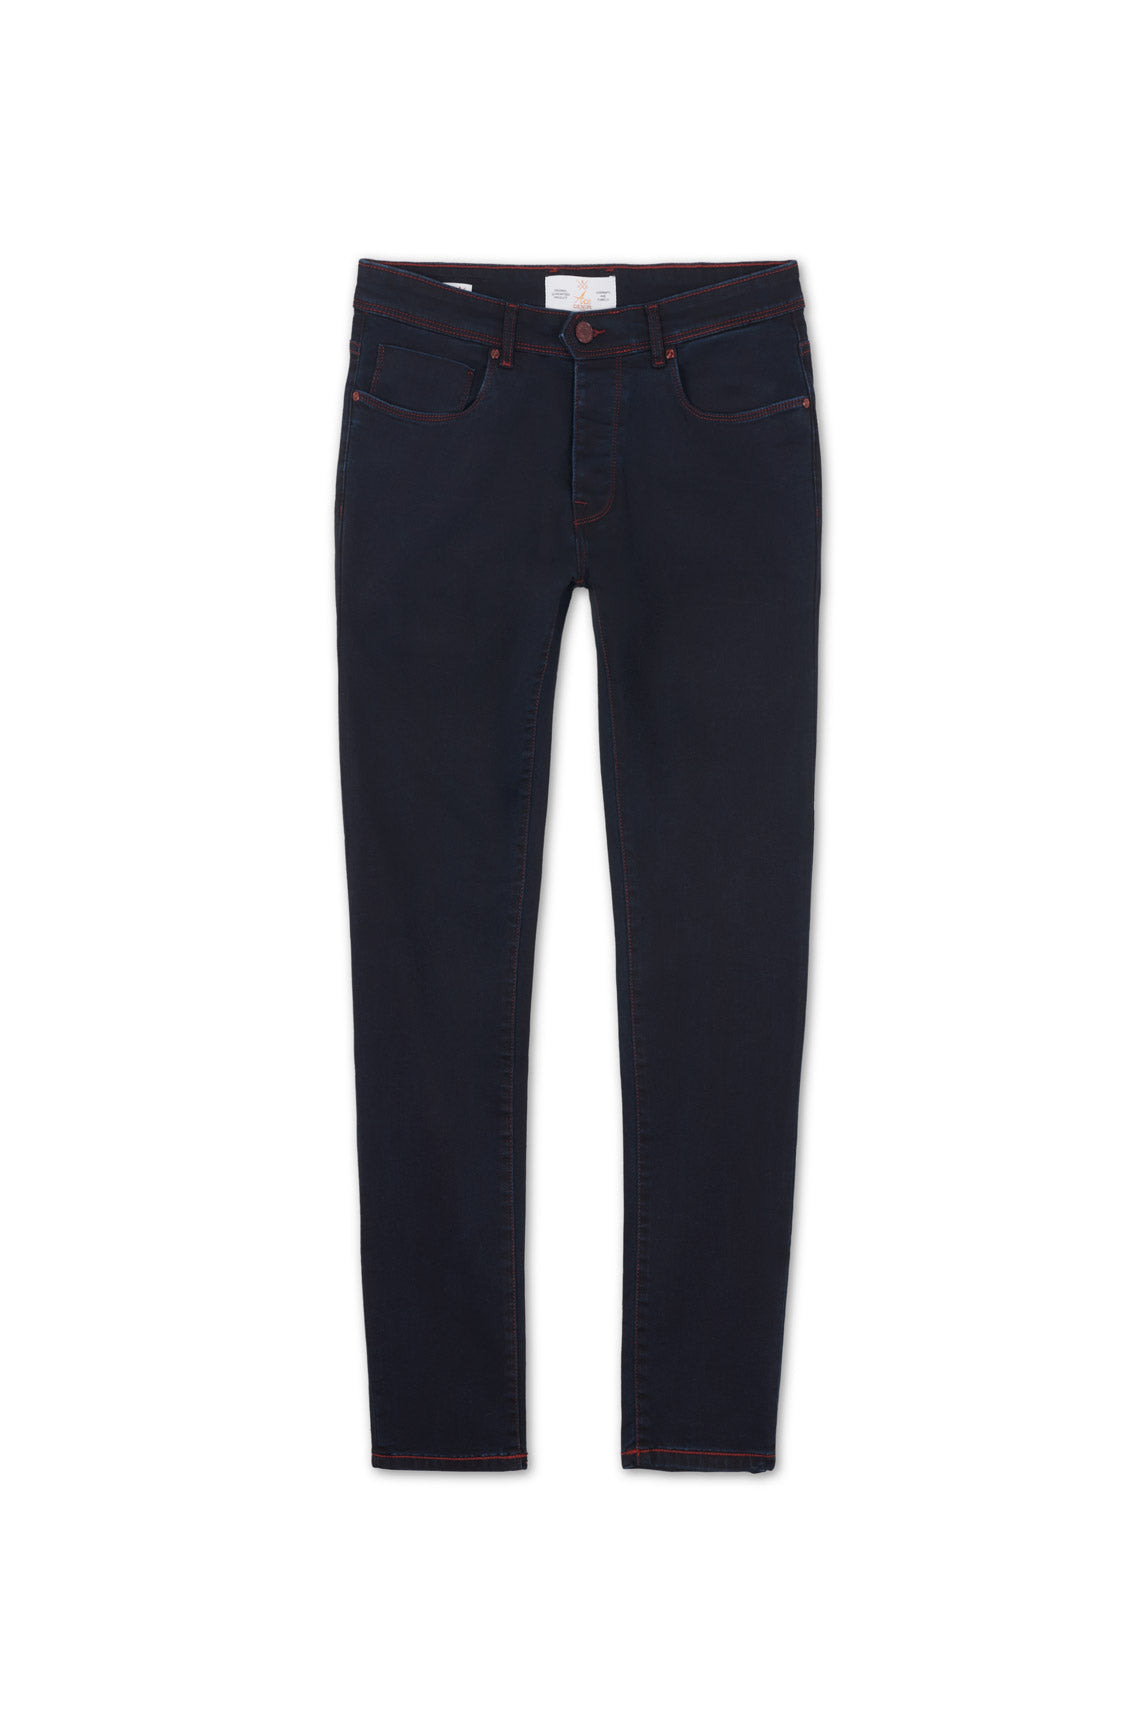 jeans homme bleu marine boutons rouge coupe slim